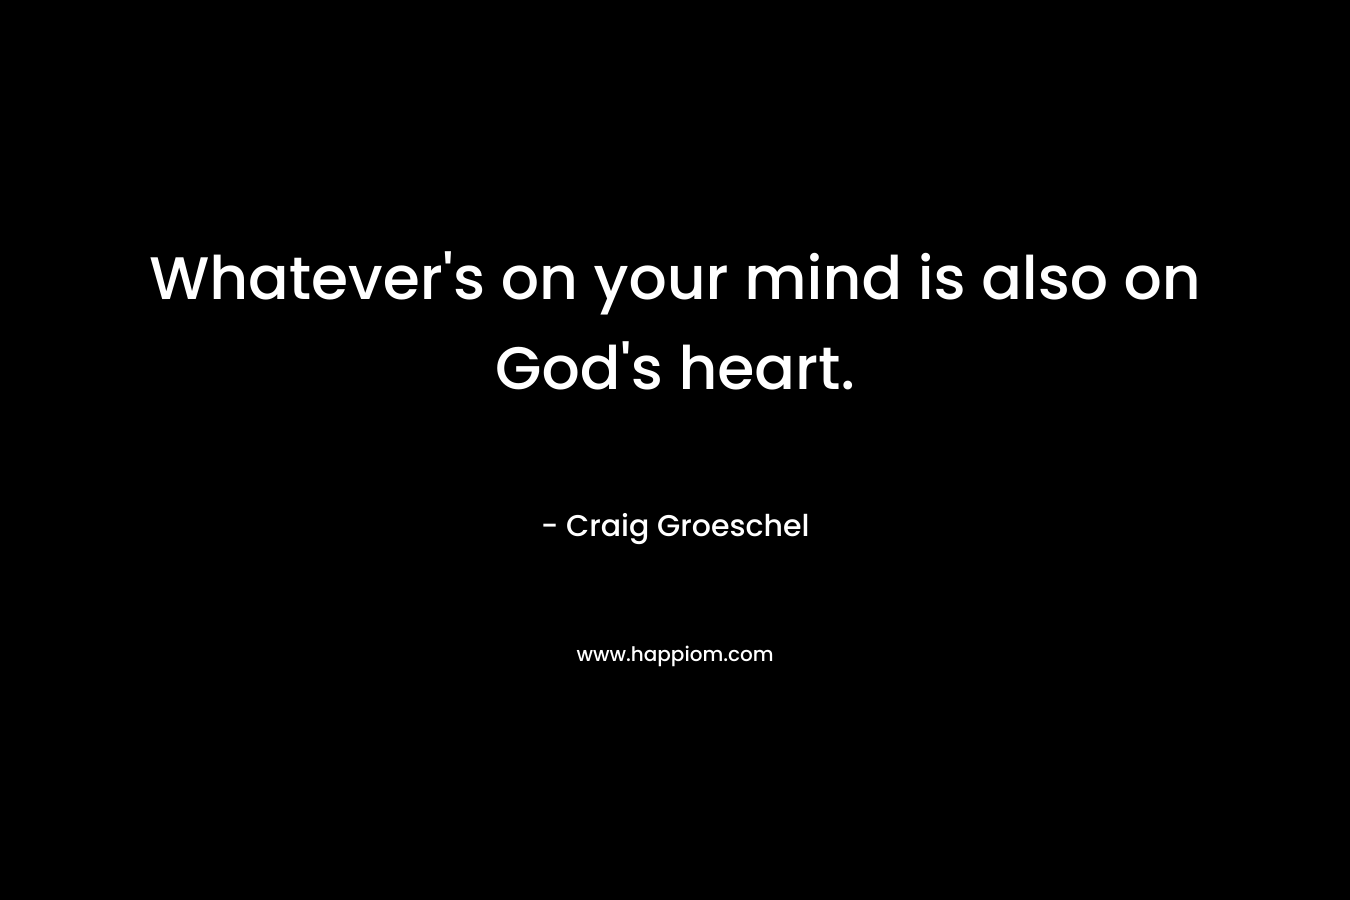 Whatever’s on your mind is also on God’s heart. – Craig Groeschel